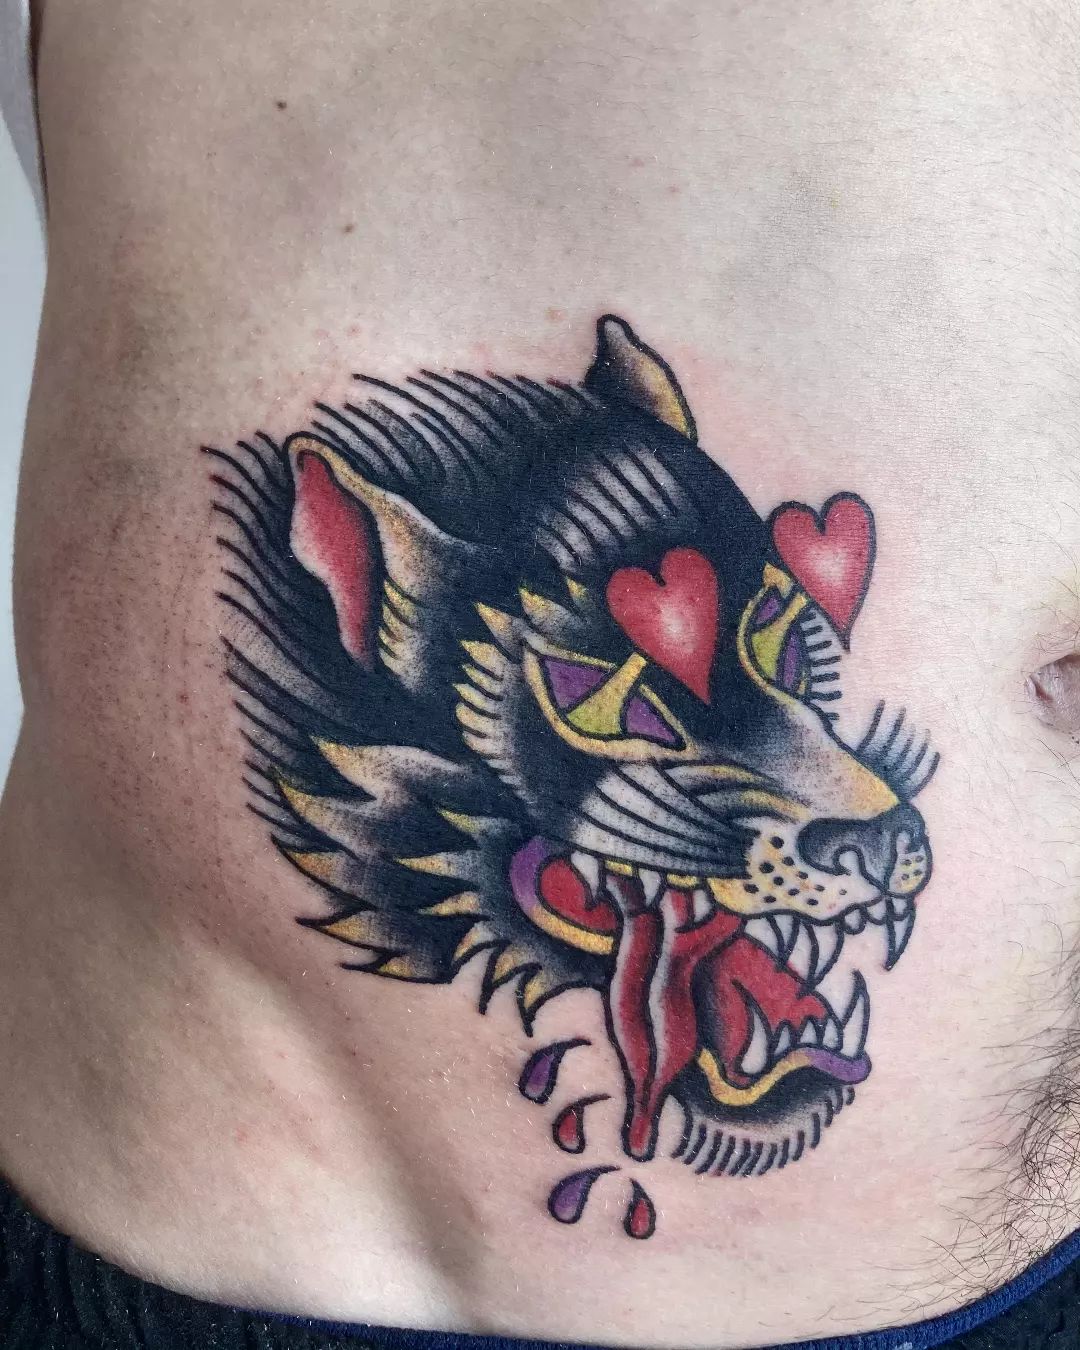 Eccentric wolf tattoo with heart-eyes will be a perfect choice if you want to get an extraordinary tattoo.